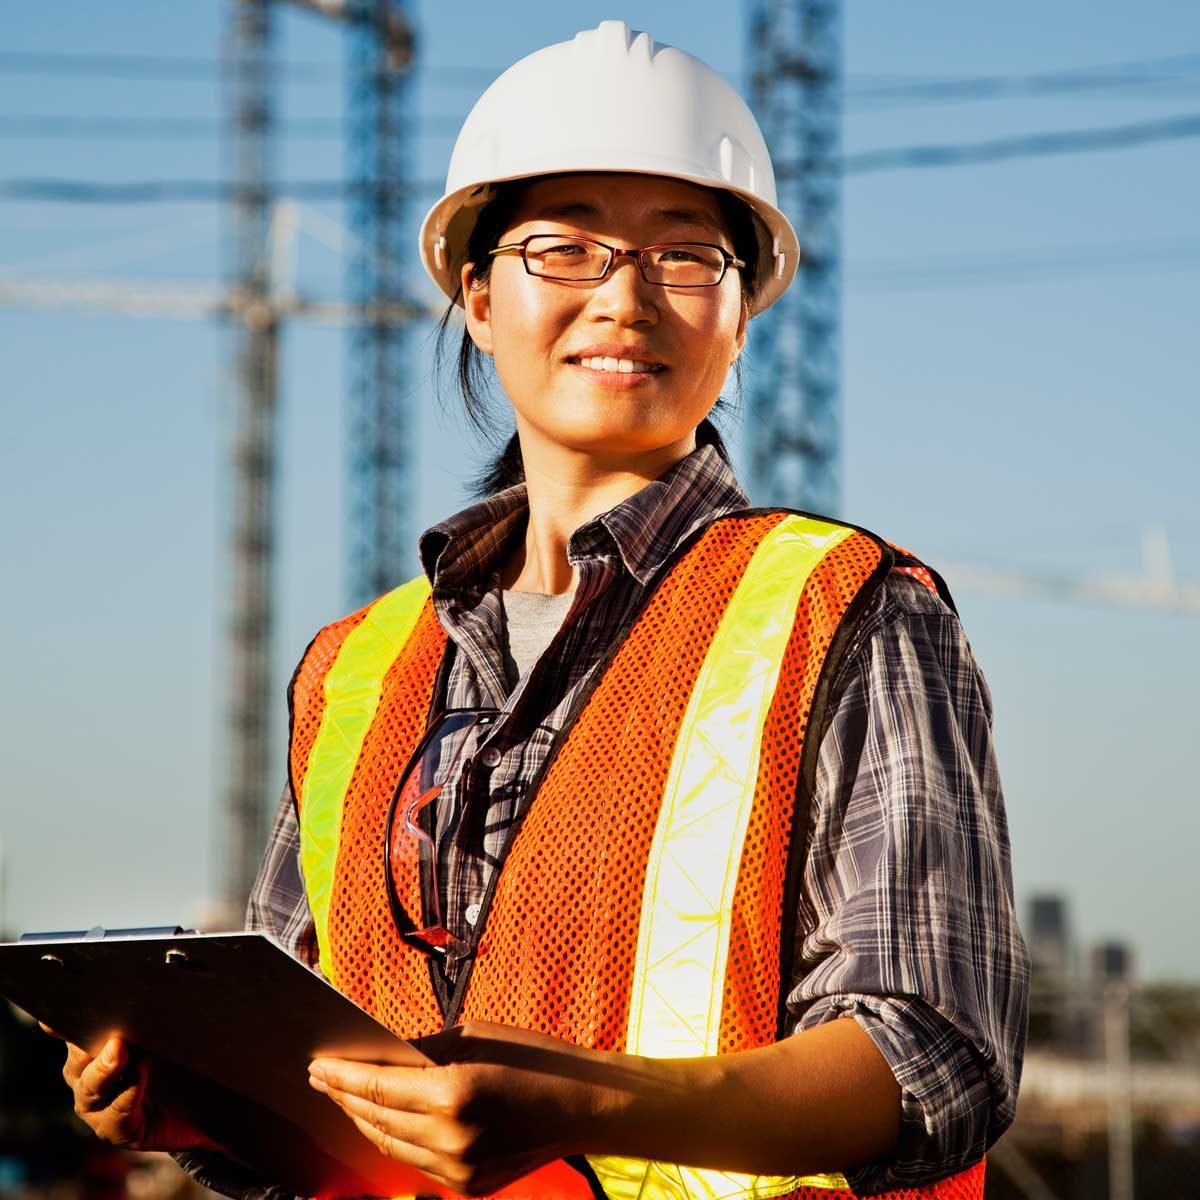 History of Women in Construction